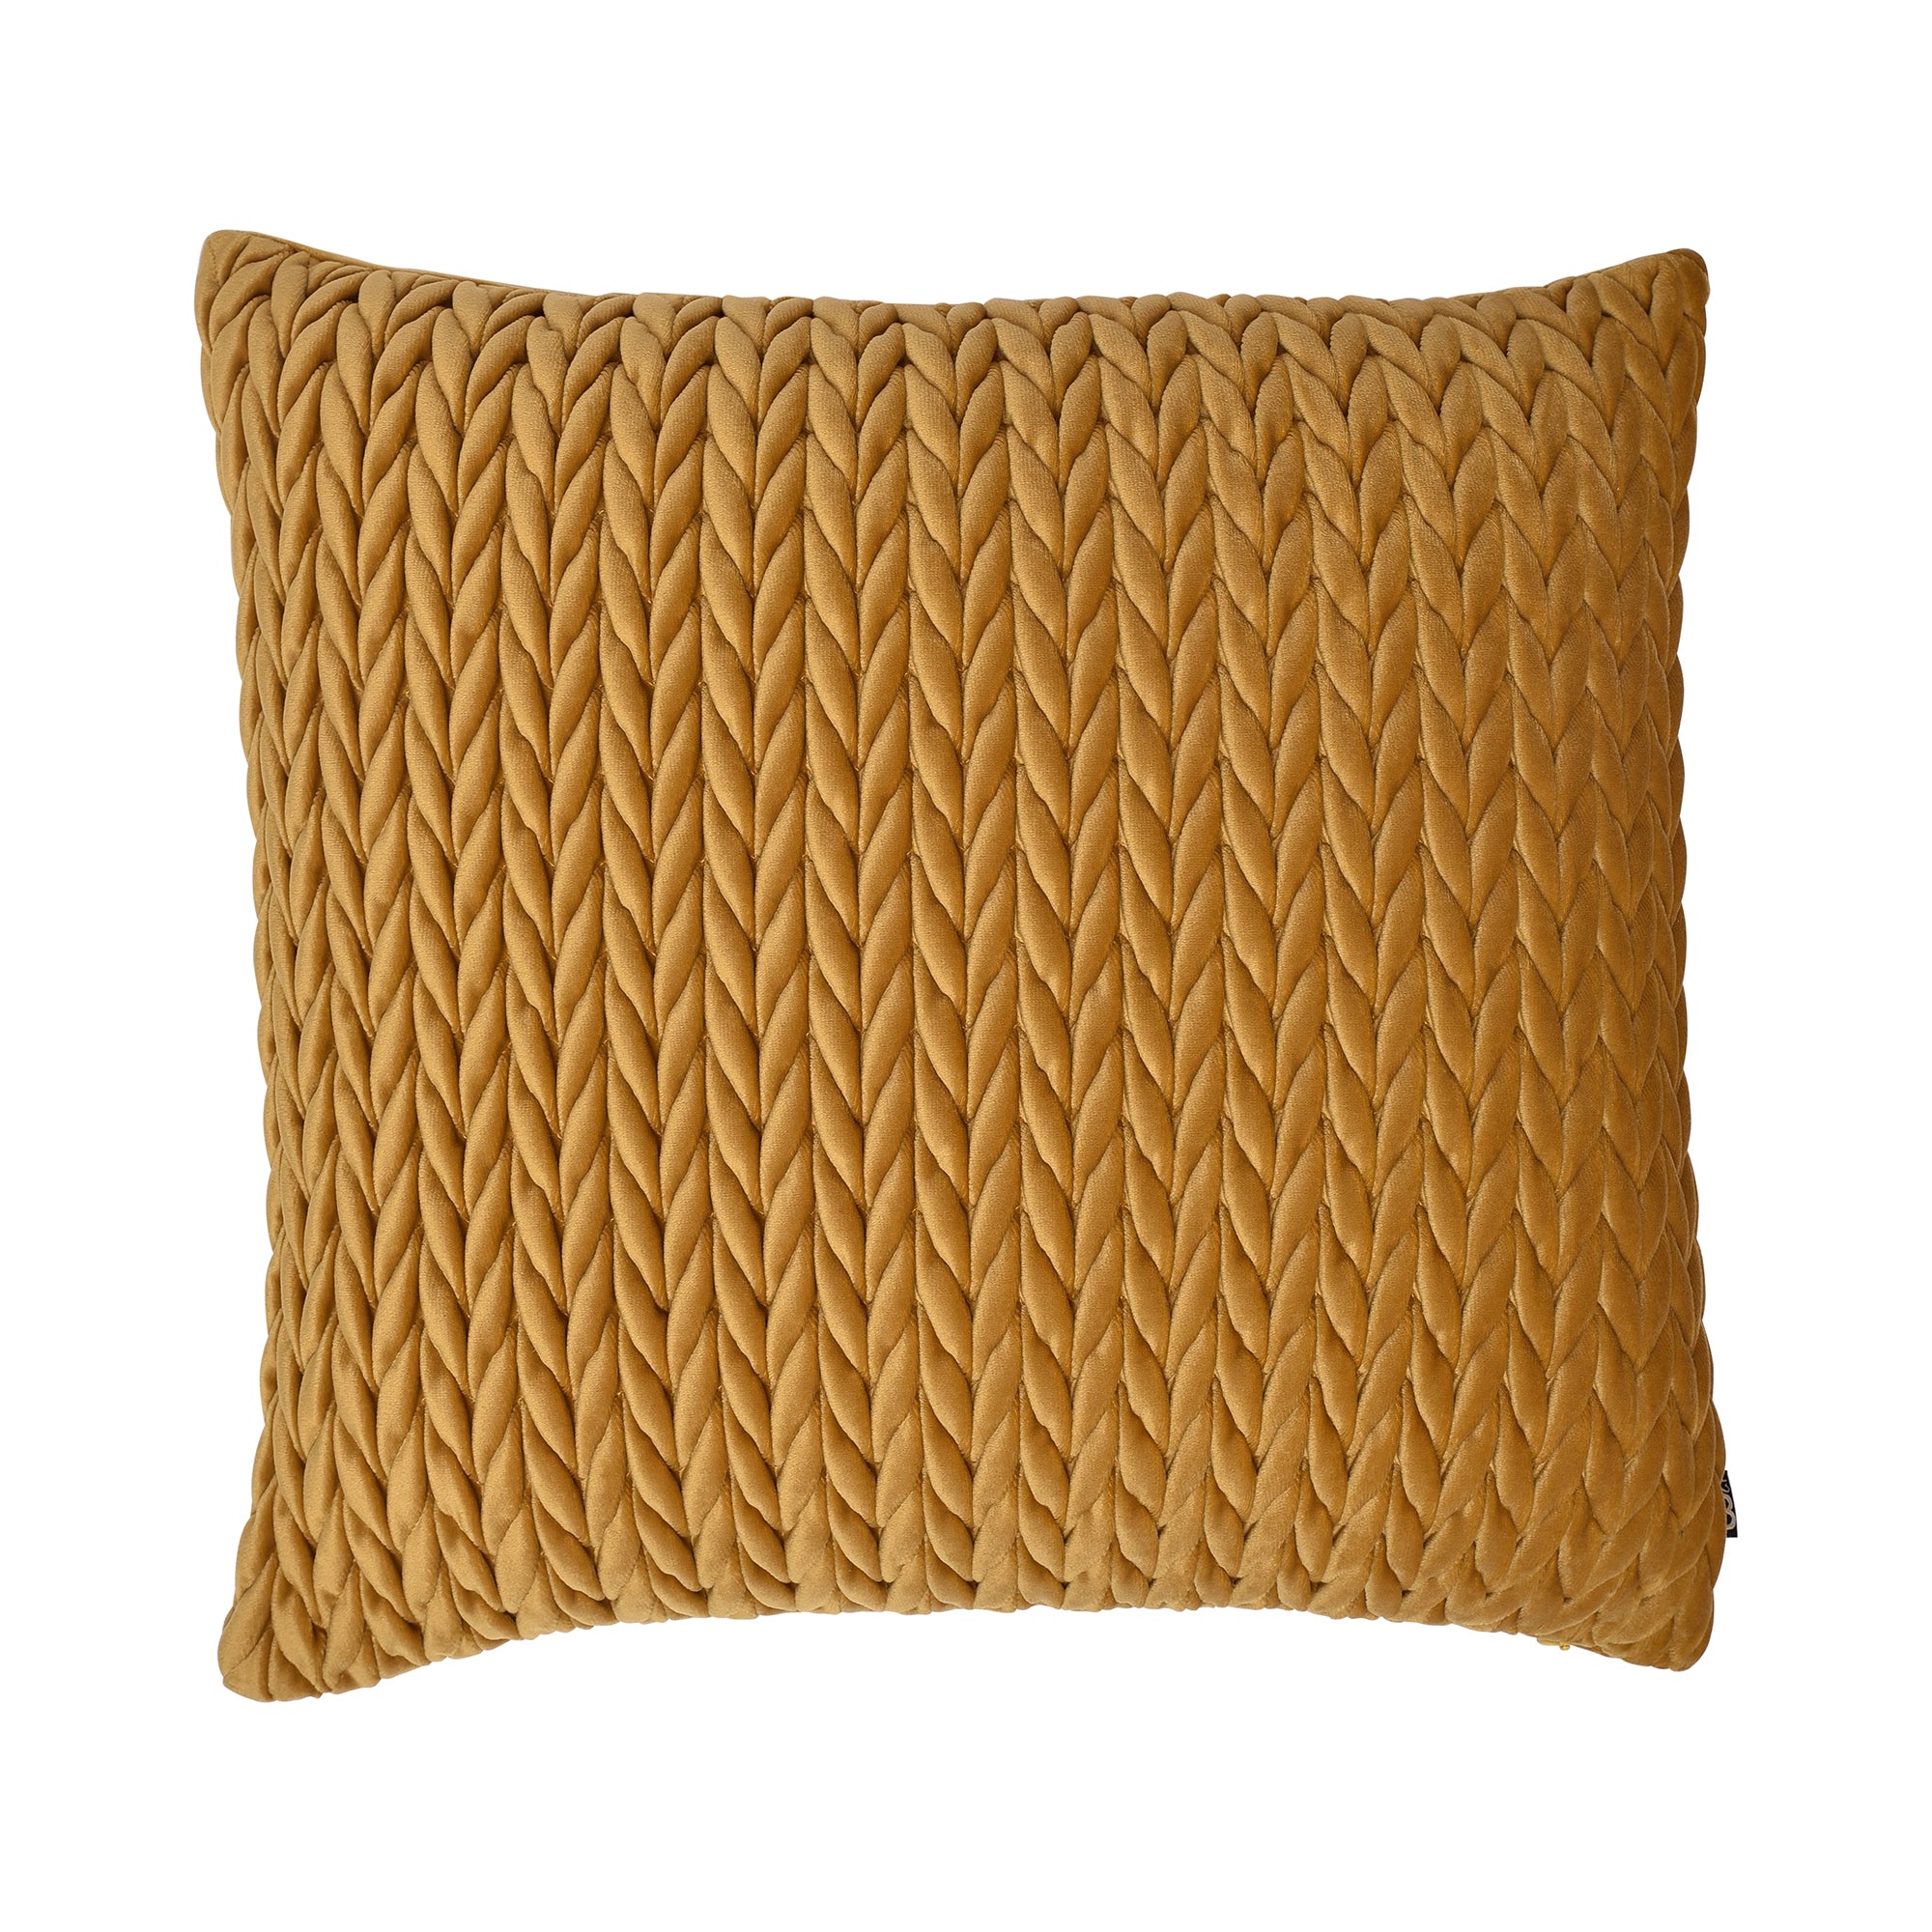 Amory Cushion by Laurence Llewelyn-Bowen in Gold 43 x 43cm - Cushion - Laurence Llewelyn-Bowen